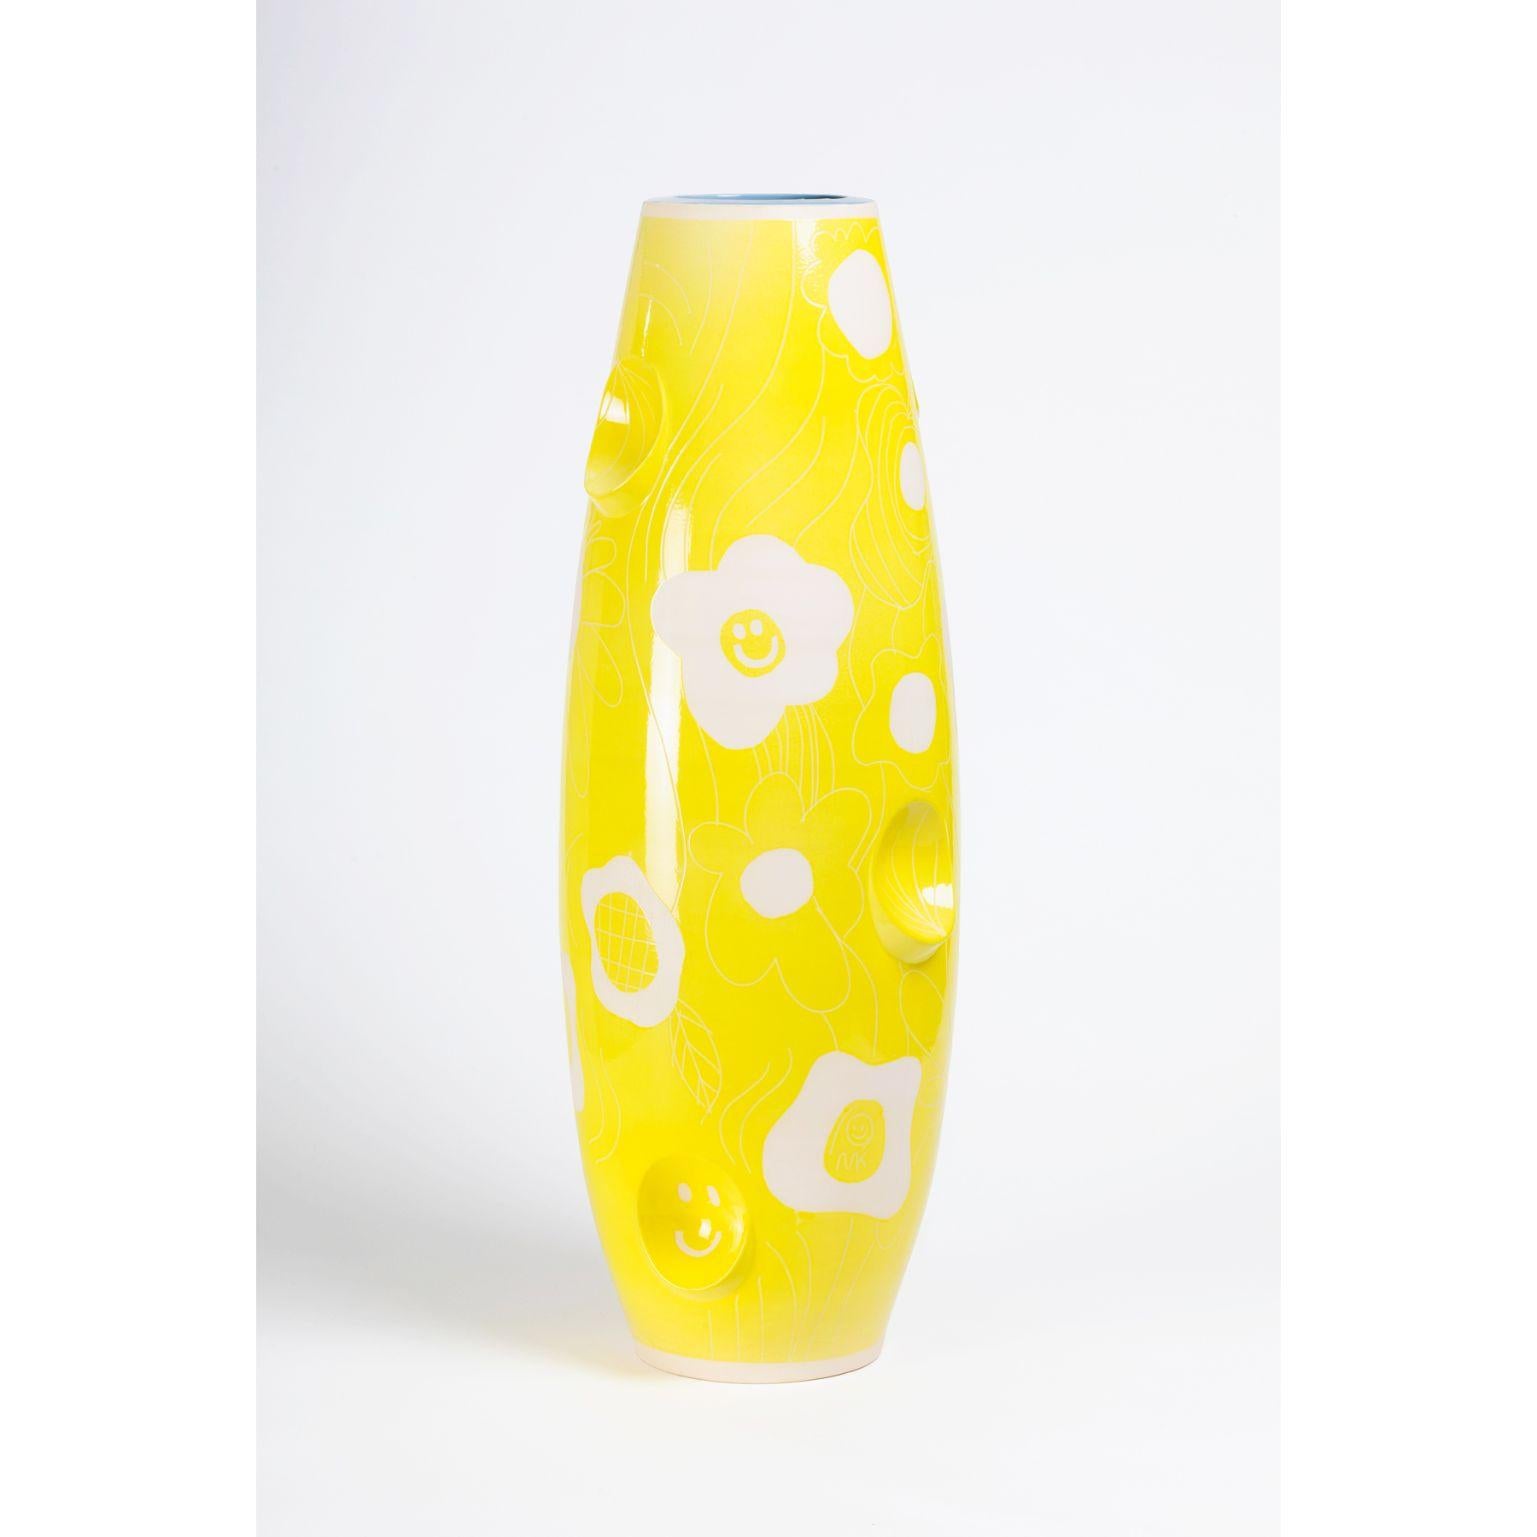 Teresa pop ceramic vase by Malwina Konopacka
Unique Sculpture ( Decorated and hand-painted by the artist )
Materials: Ceramics, glazed interior, Sgraffito yellow glaze
Dimensions: D 25, H 79cm
 
Teresa was created by the artist for the 20018